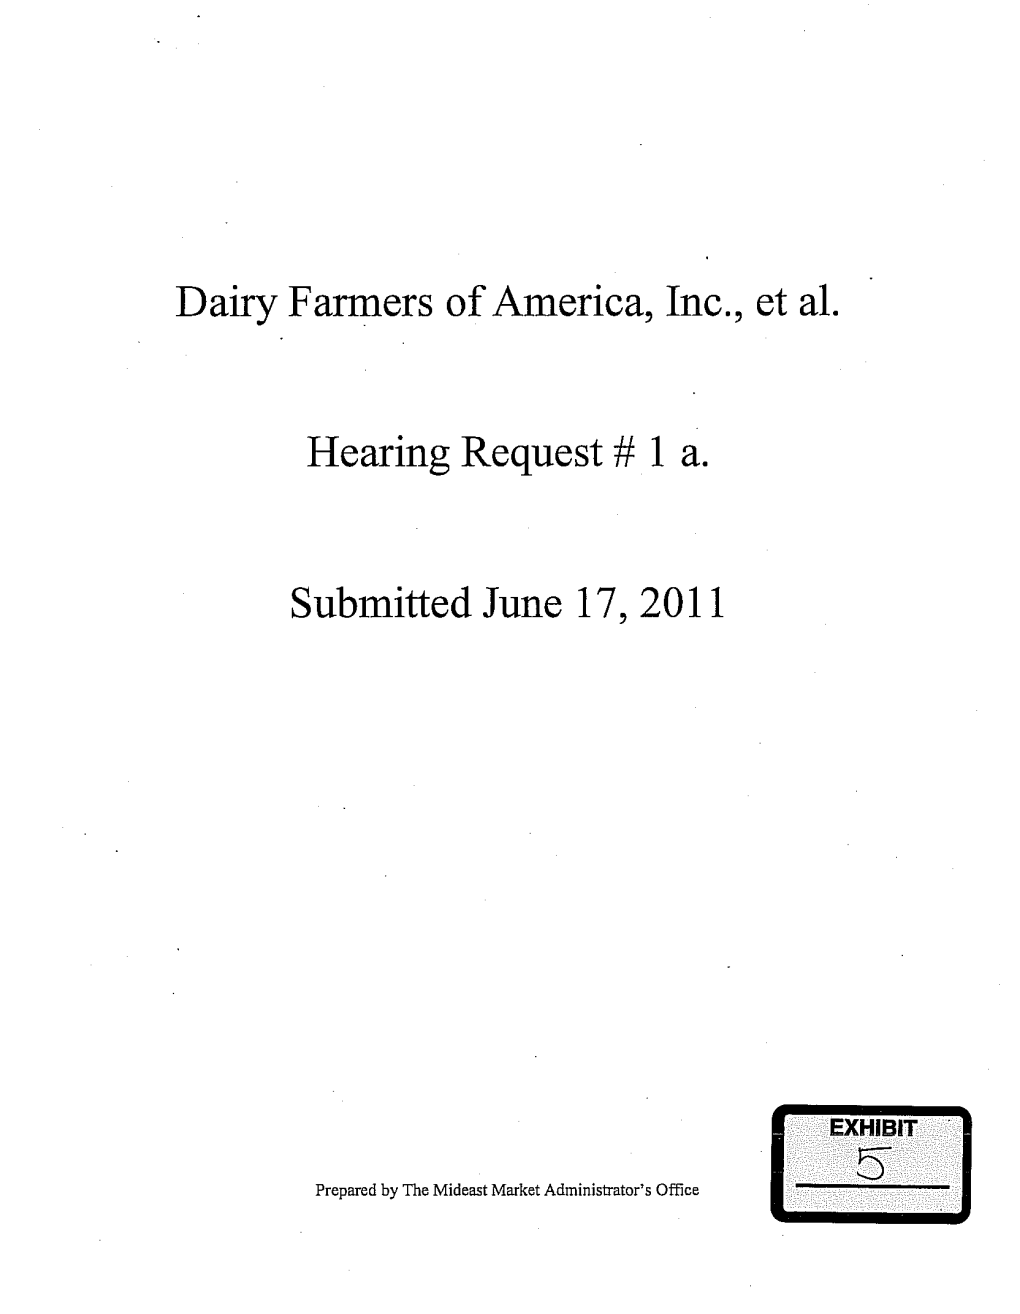 Dairy Farmers of America, Inc., Et Al. Hearing Request # 1 A. Submitted